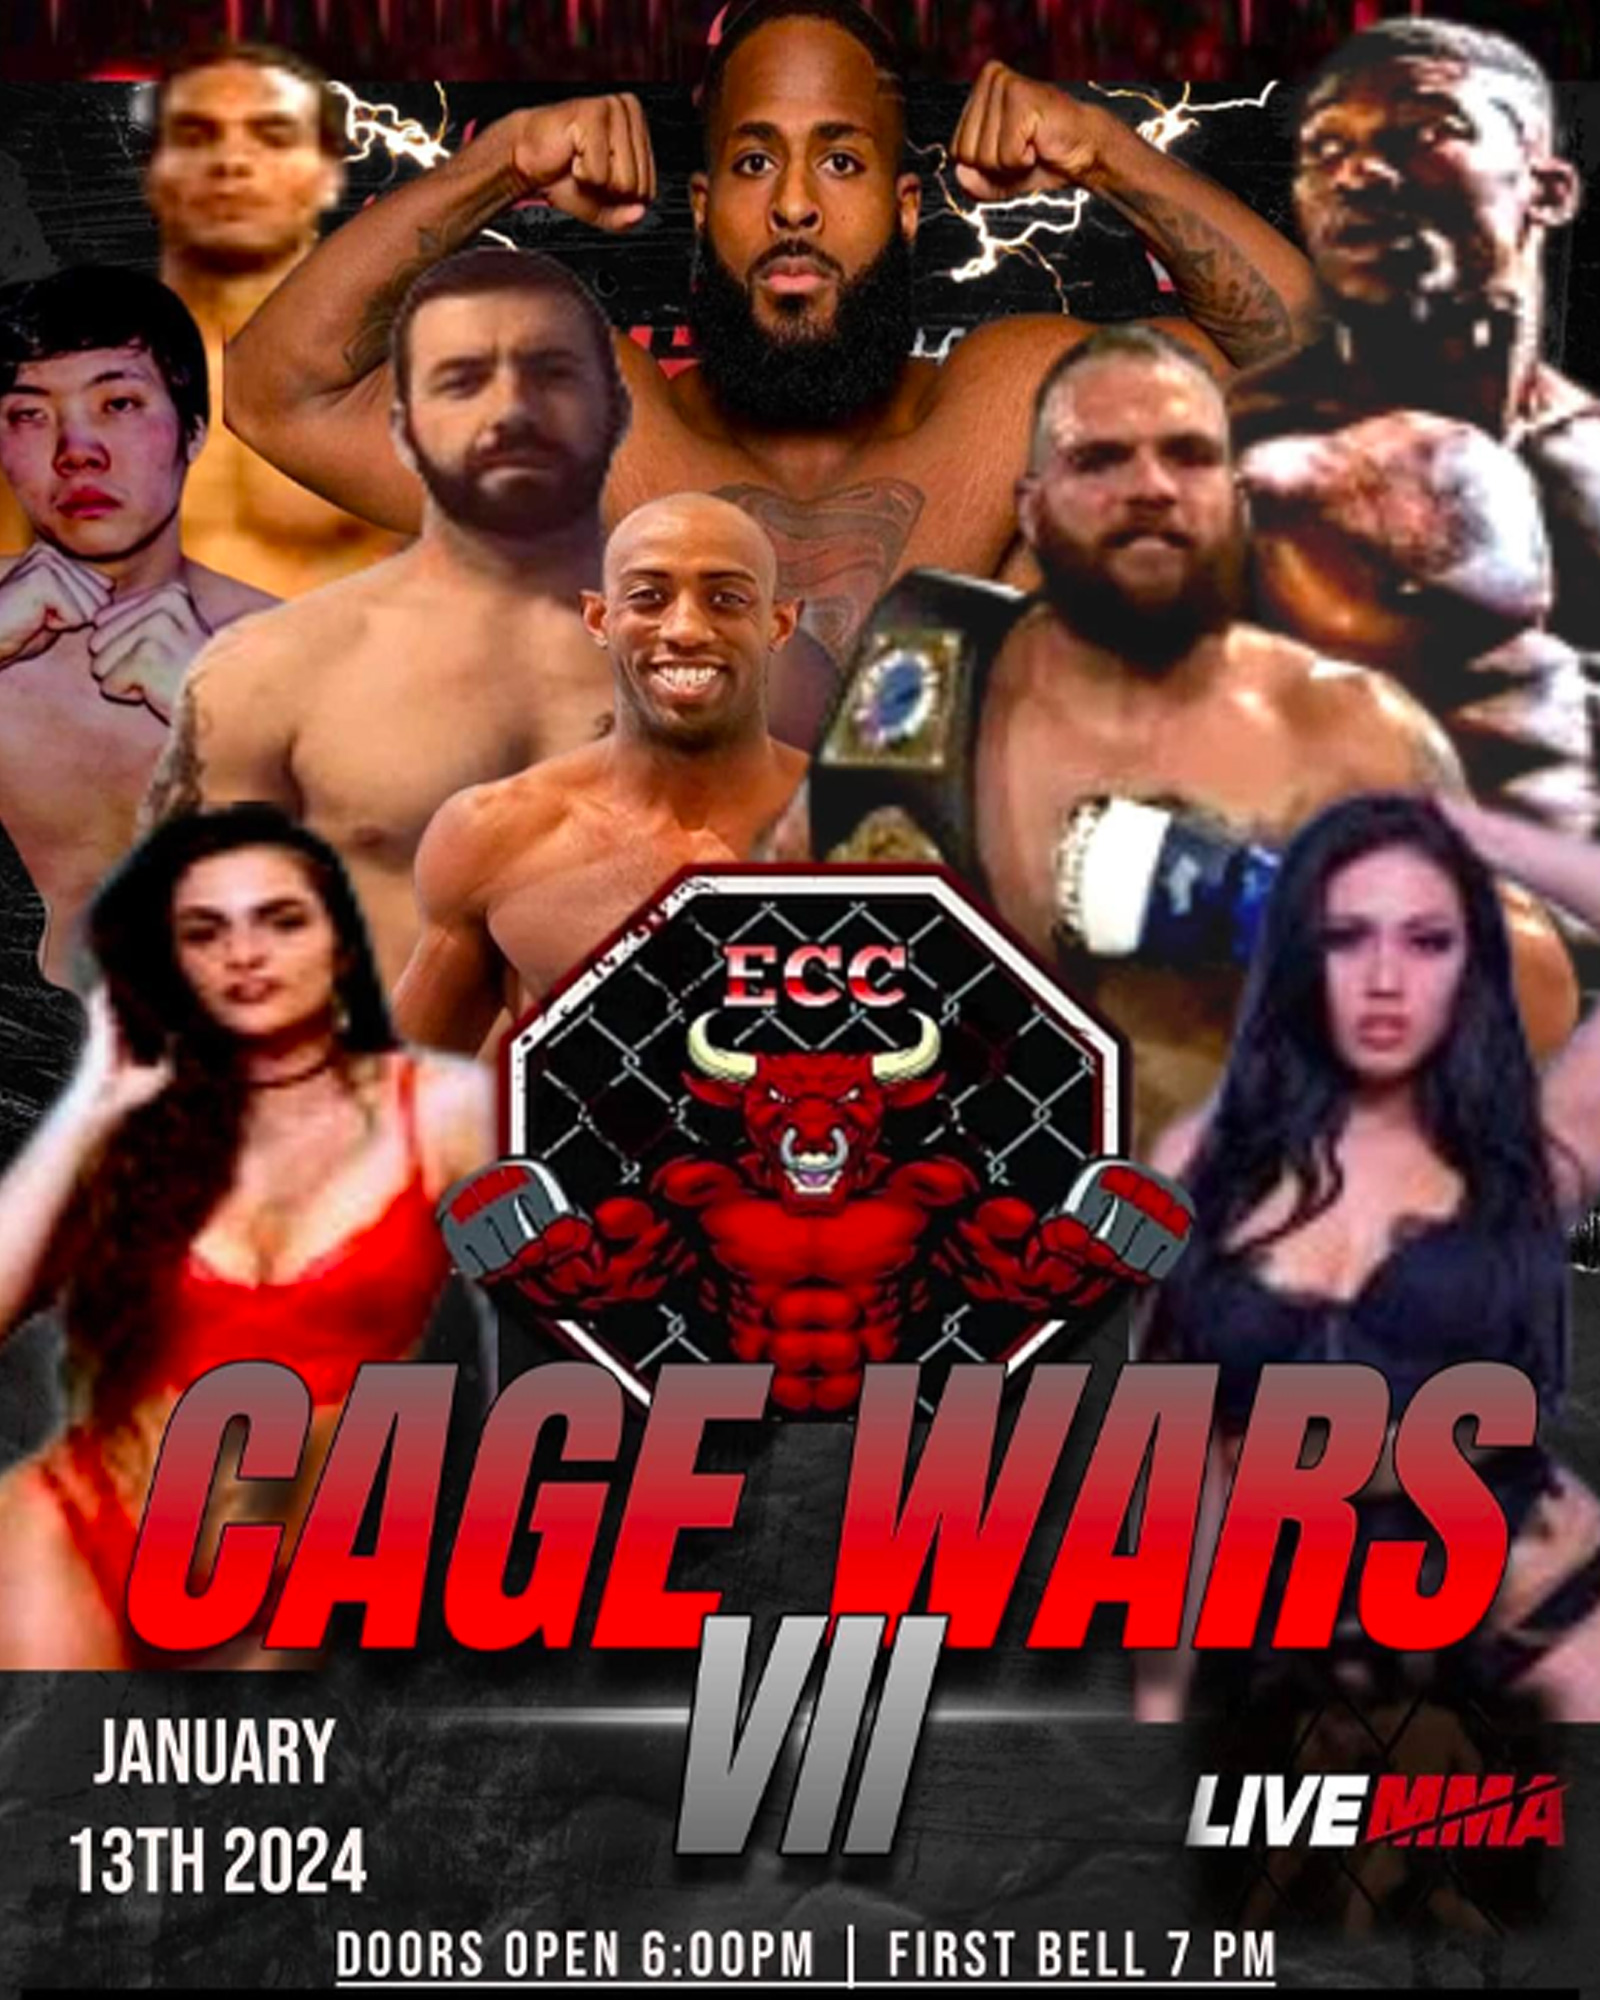 ECC Cage Wars 7 Live on Combat Sports Now